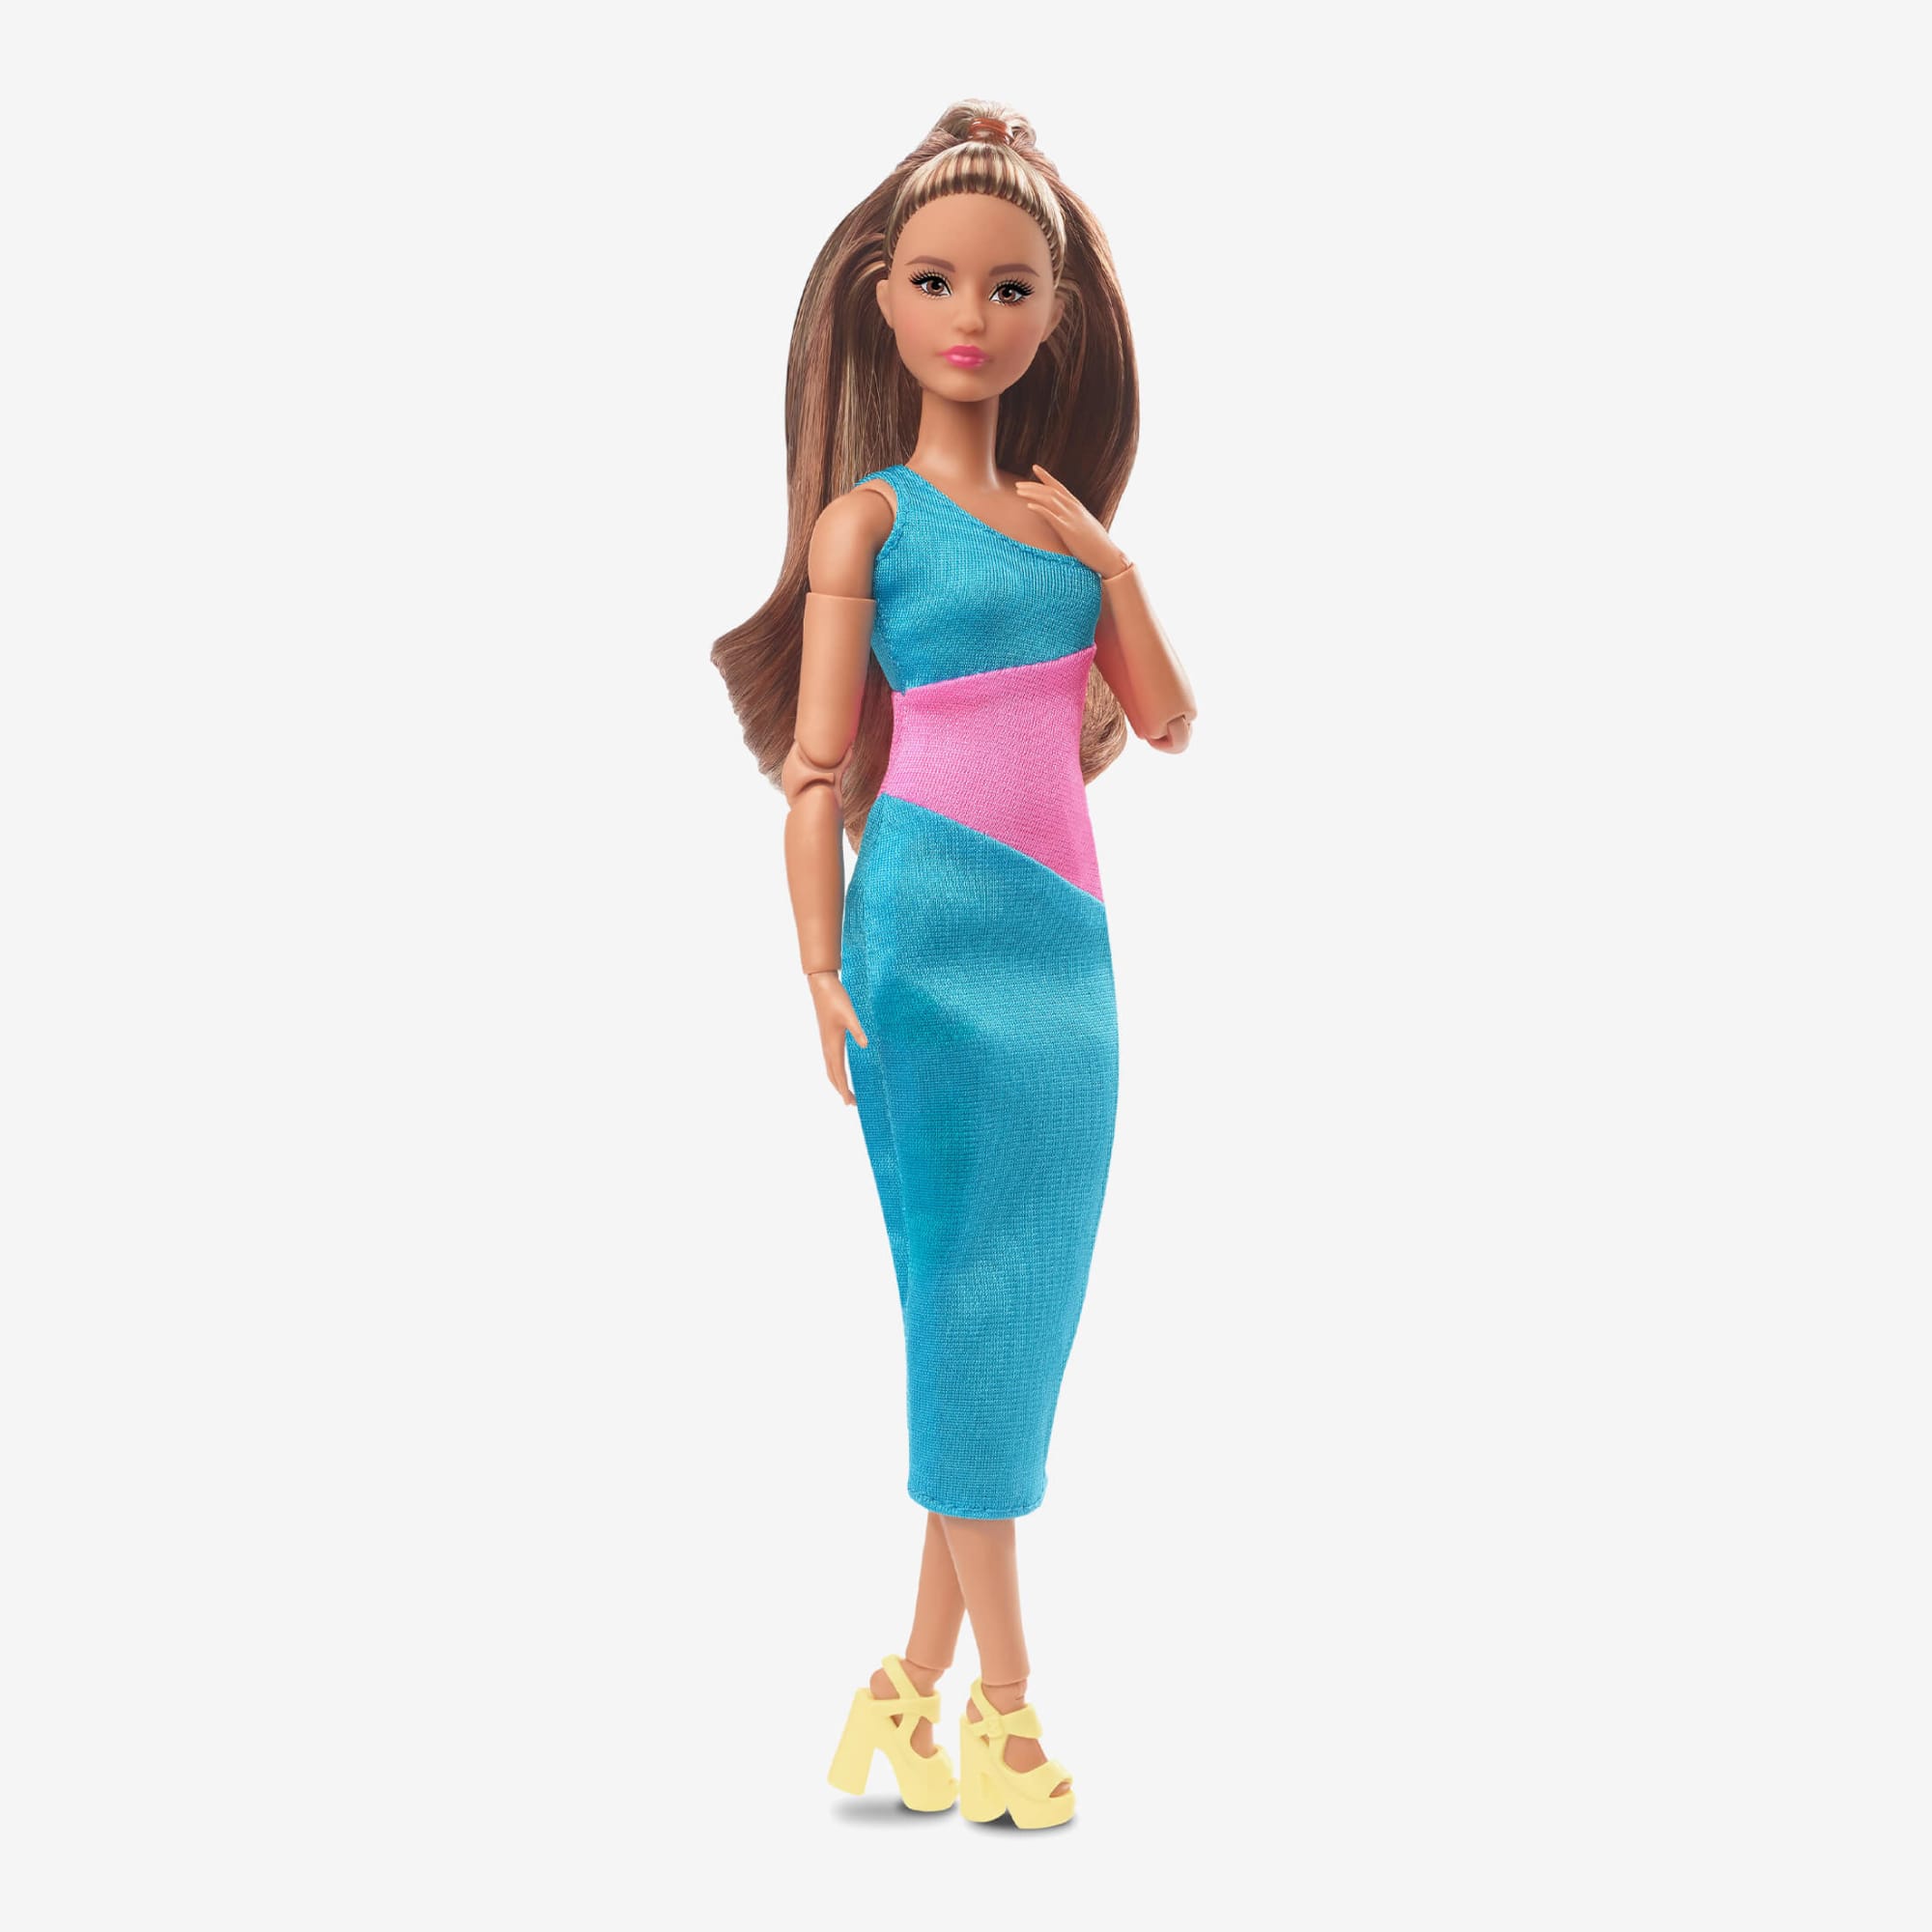 Barbie Has A New Look — And The Small Change They Made Is